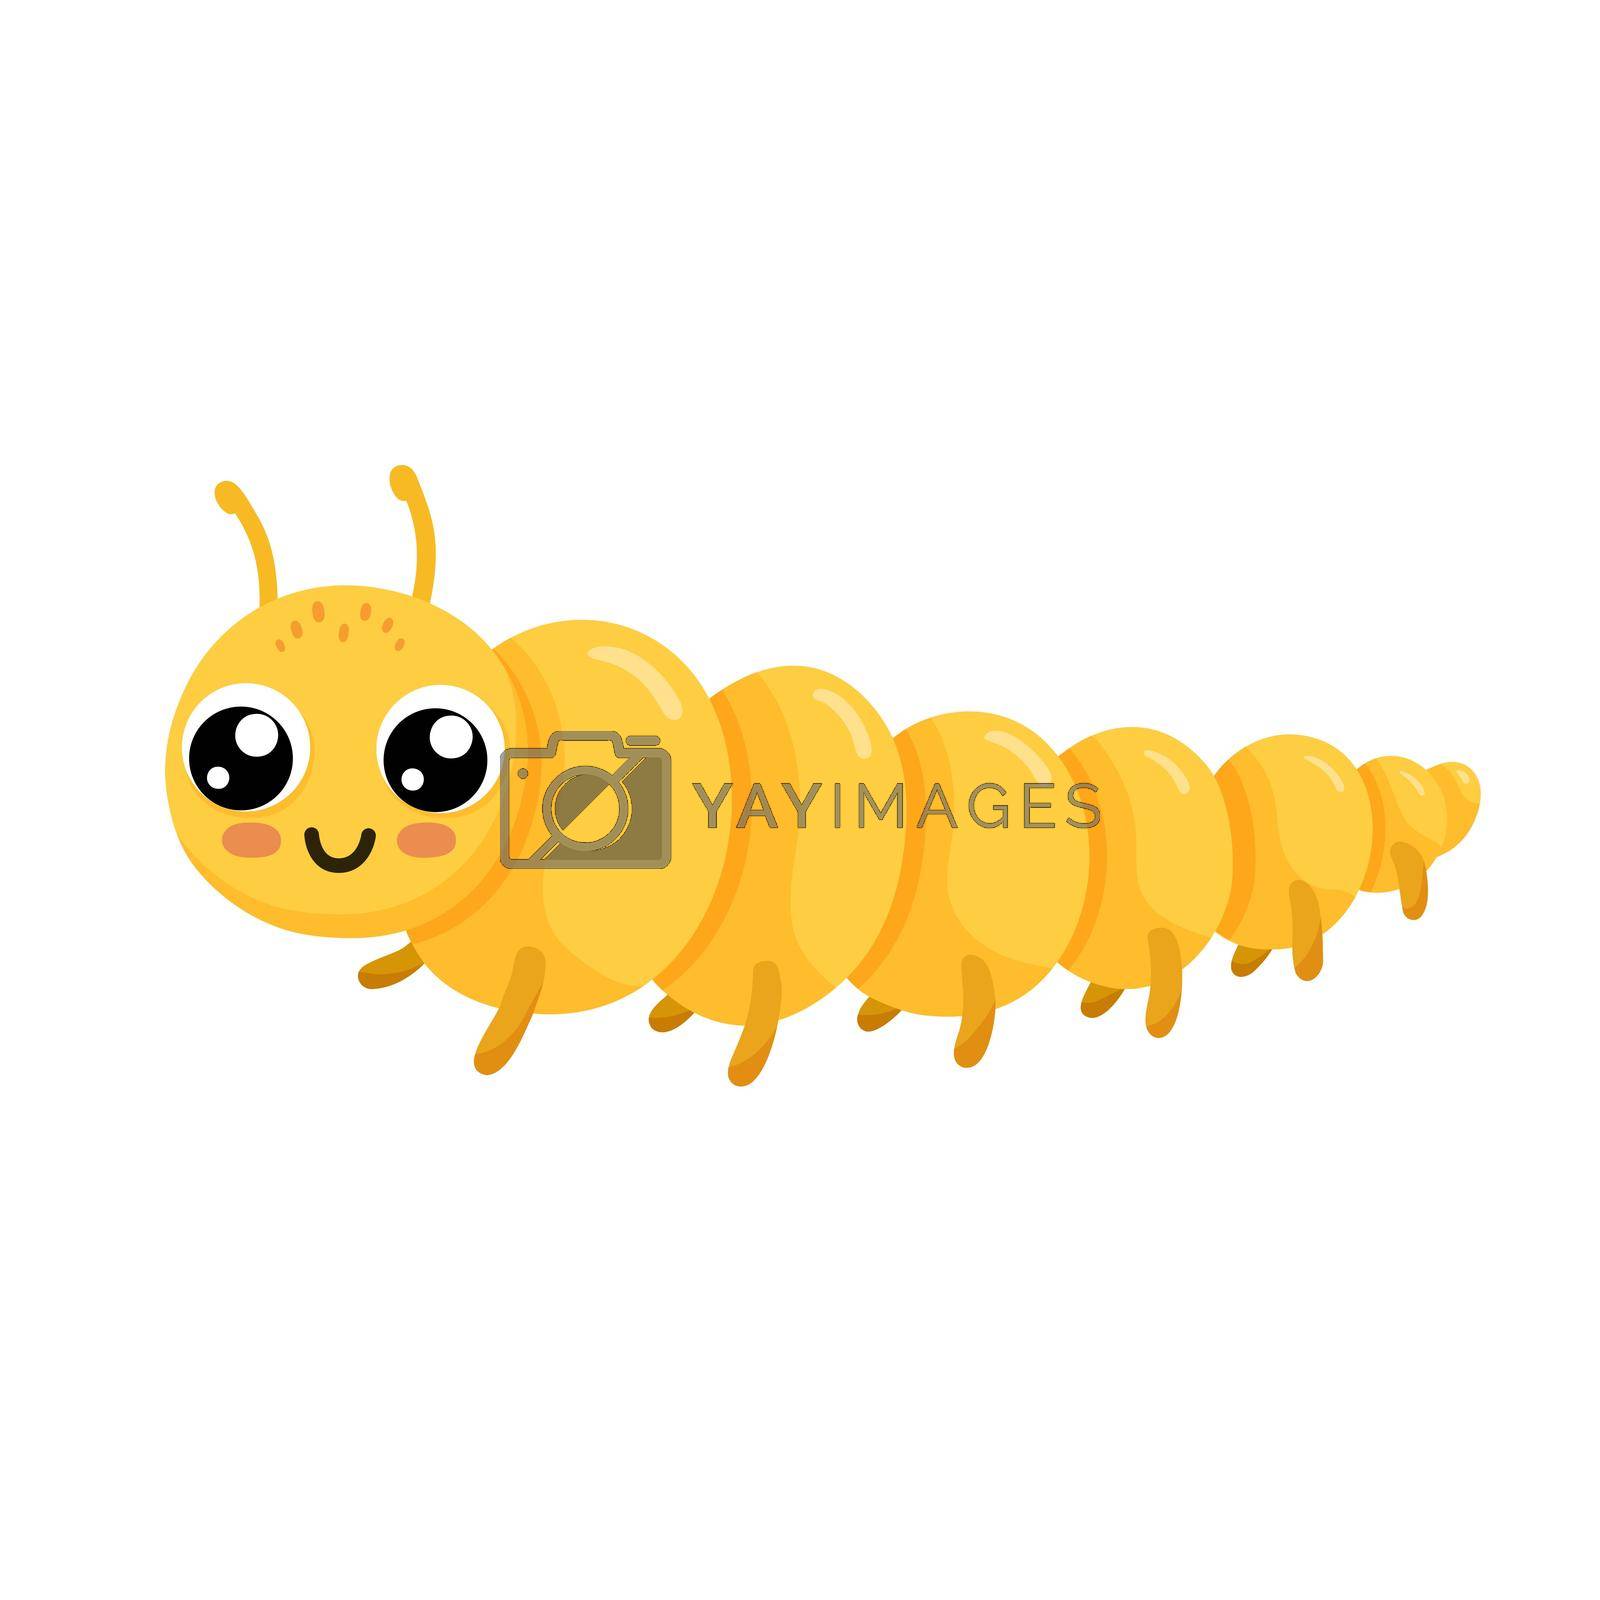 Cute yellow smiling caterpillar isolated on white background. Funny insect and garden animals for children. Flat cartoon vector illustration